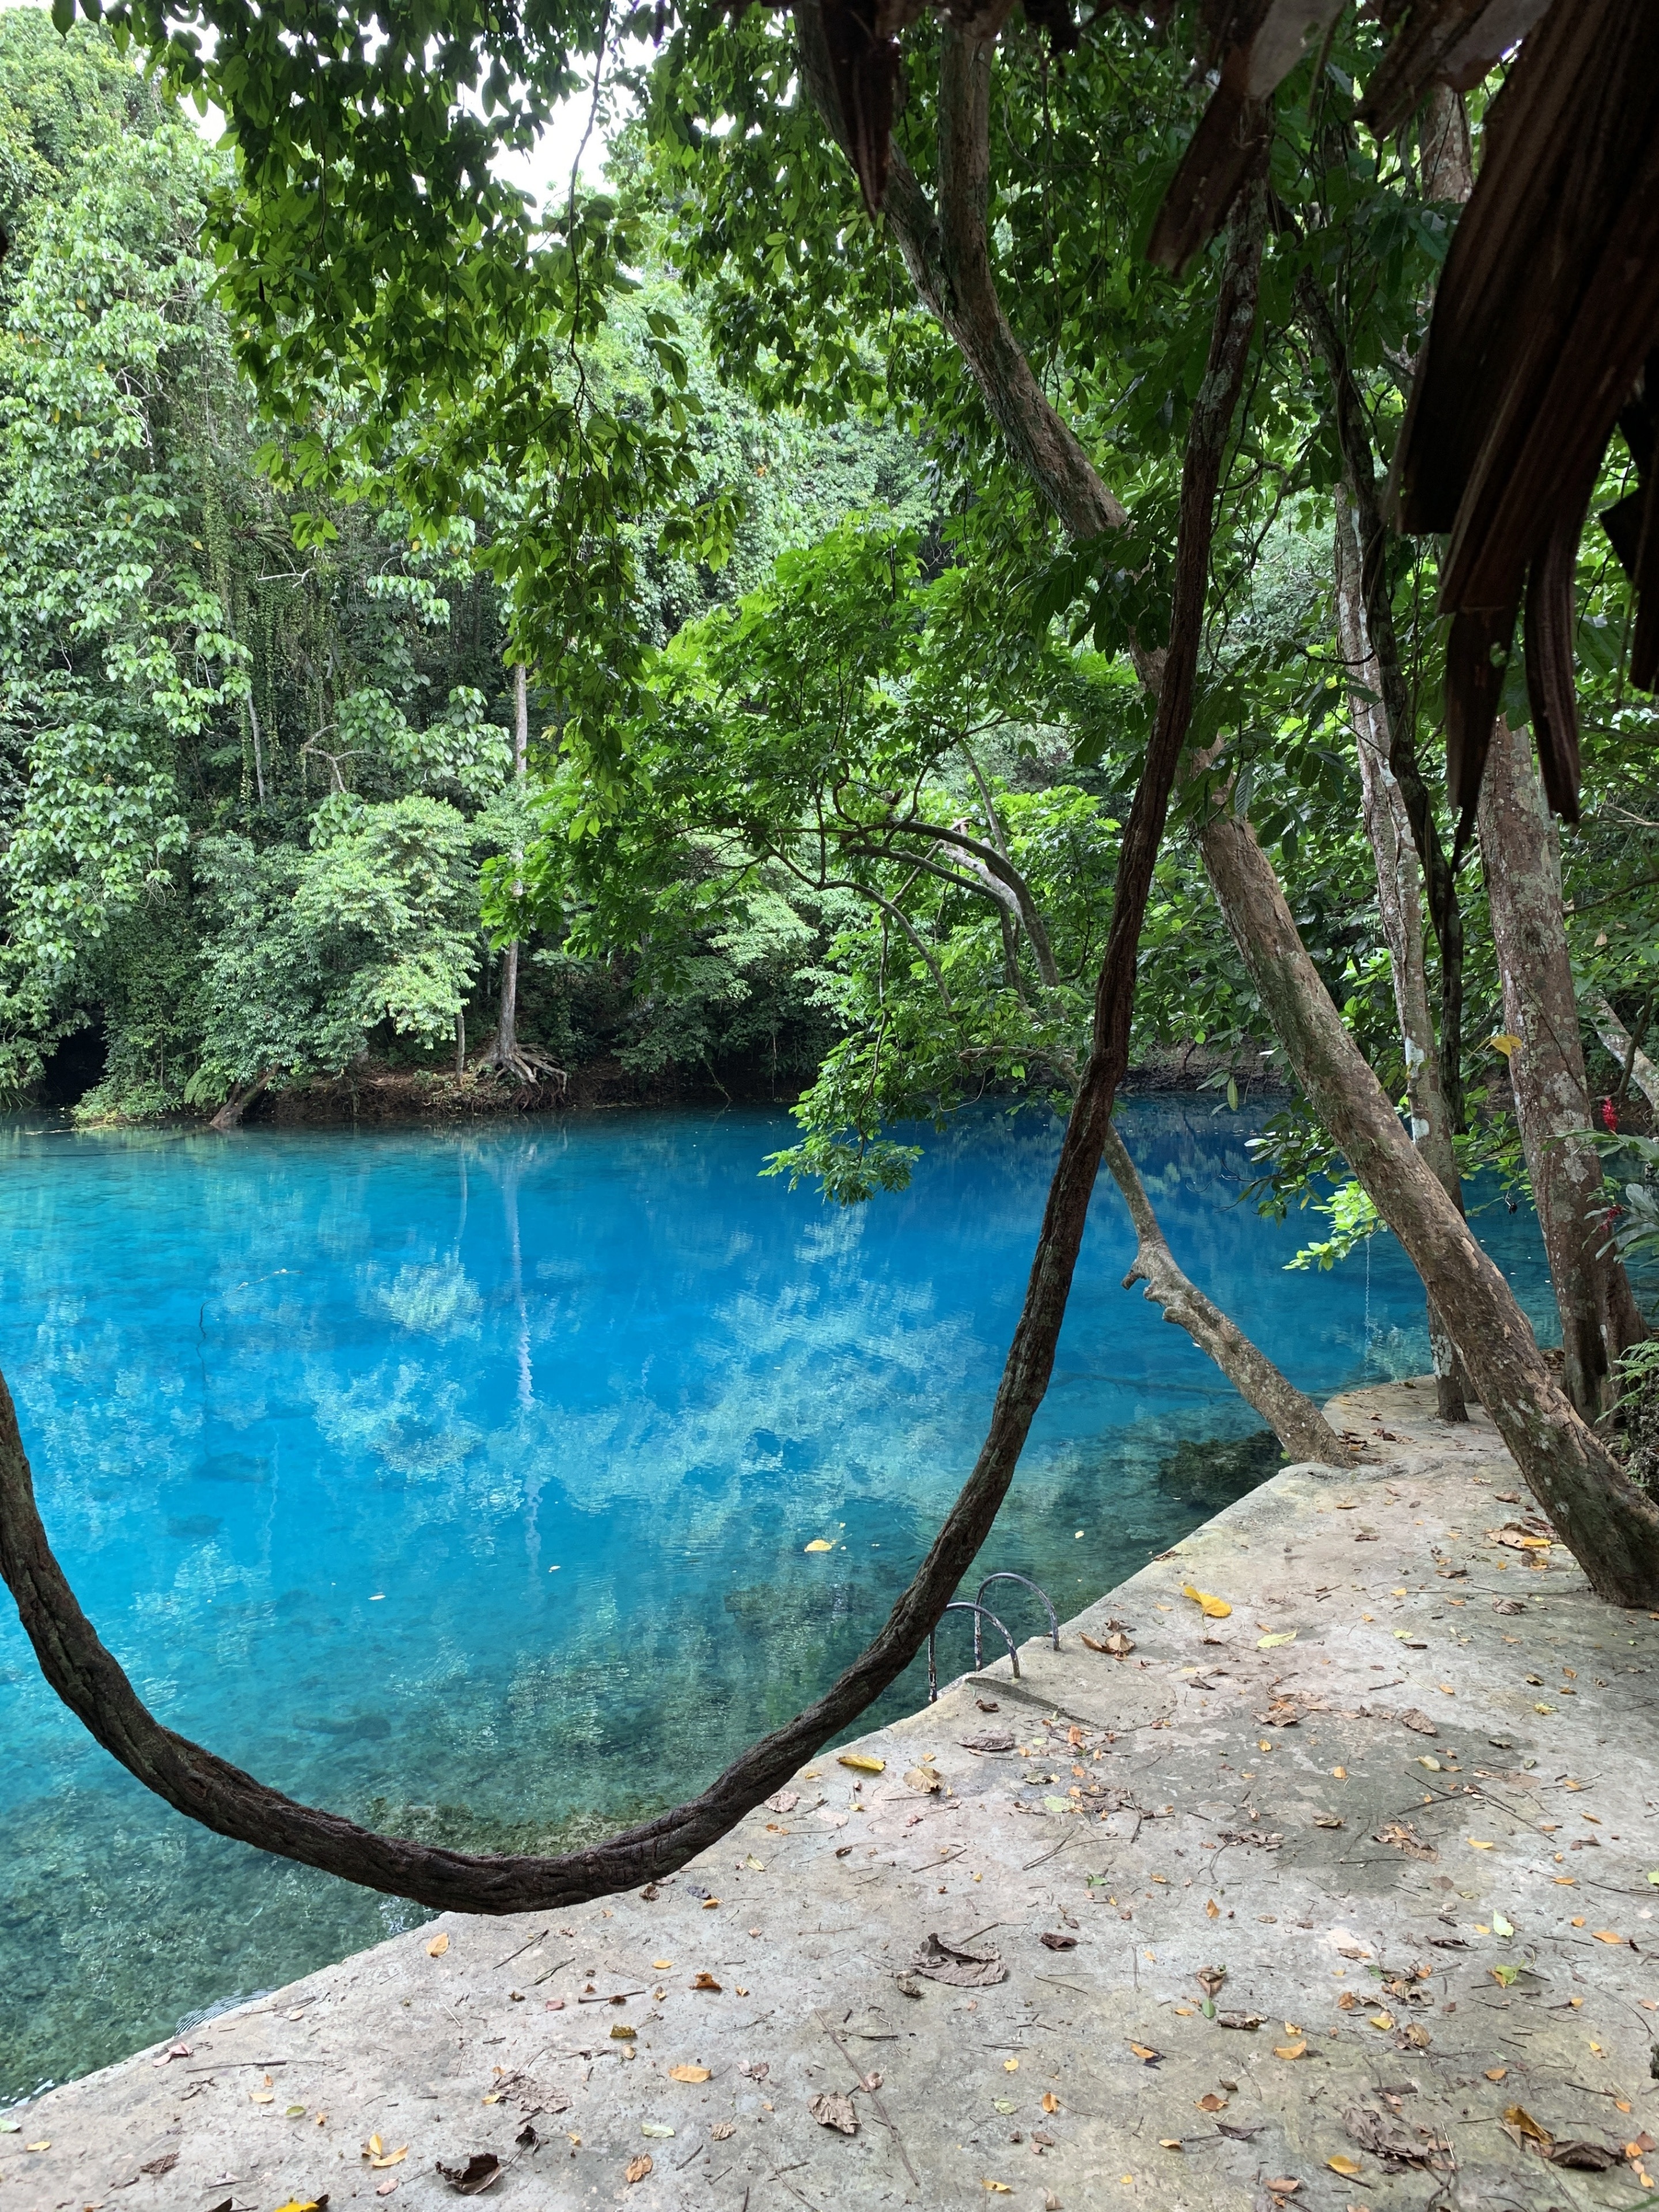 Yes really is that colour , fresh water and deep holes ,natural vine swing .